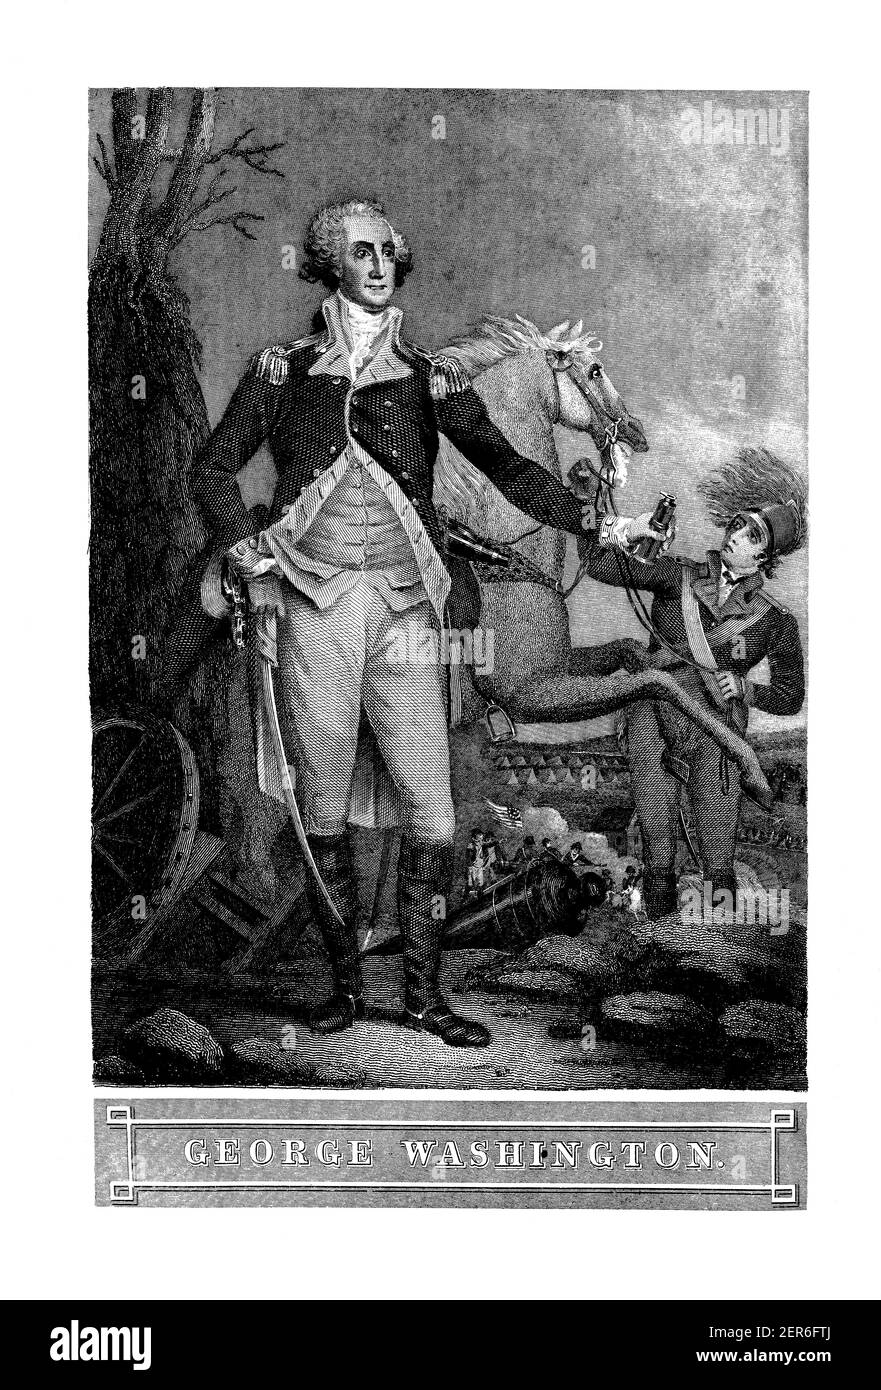 Full Length Portrait Of George Washington The First President Of The